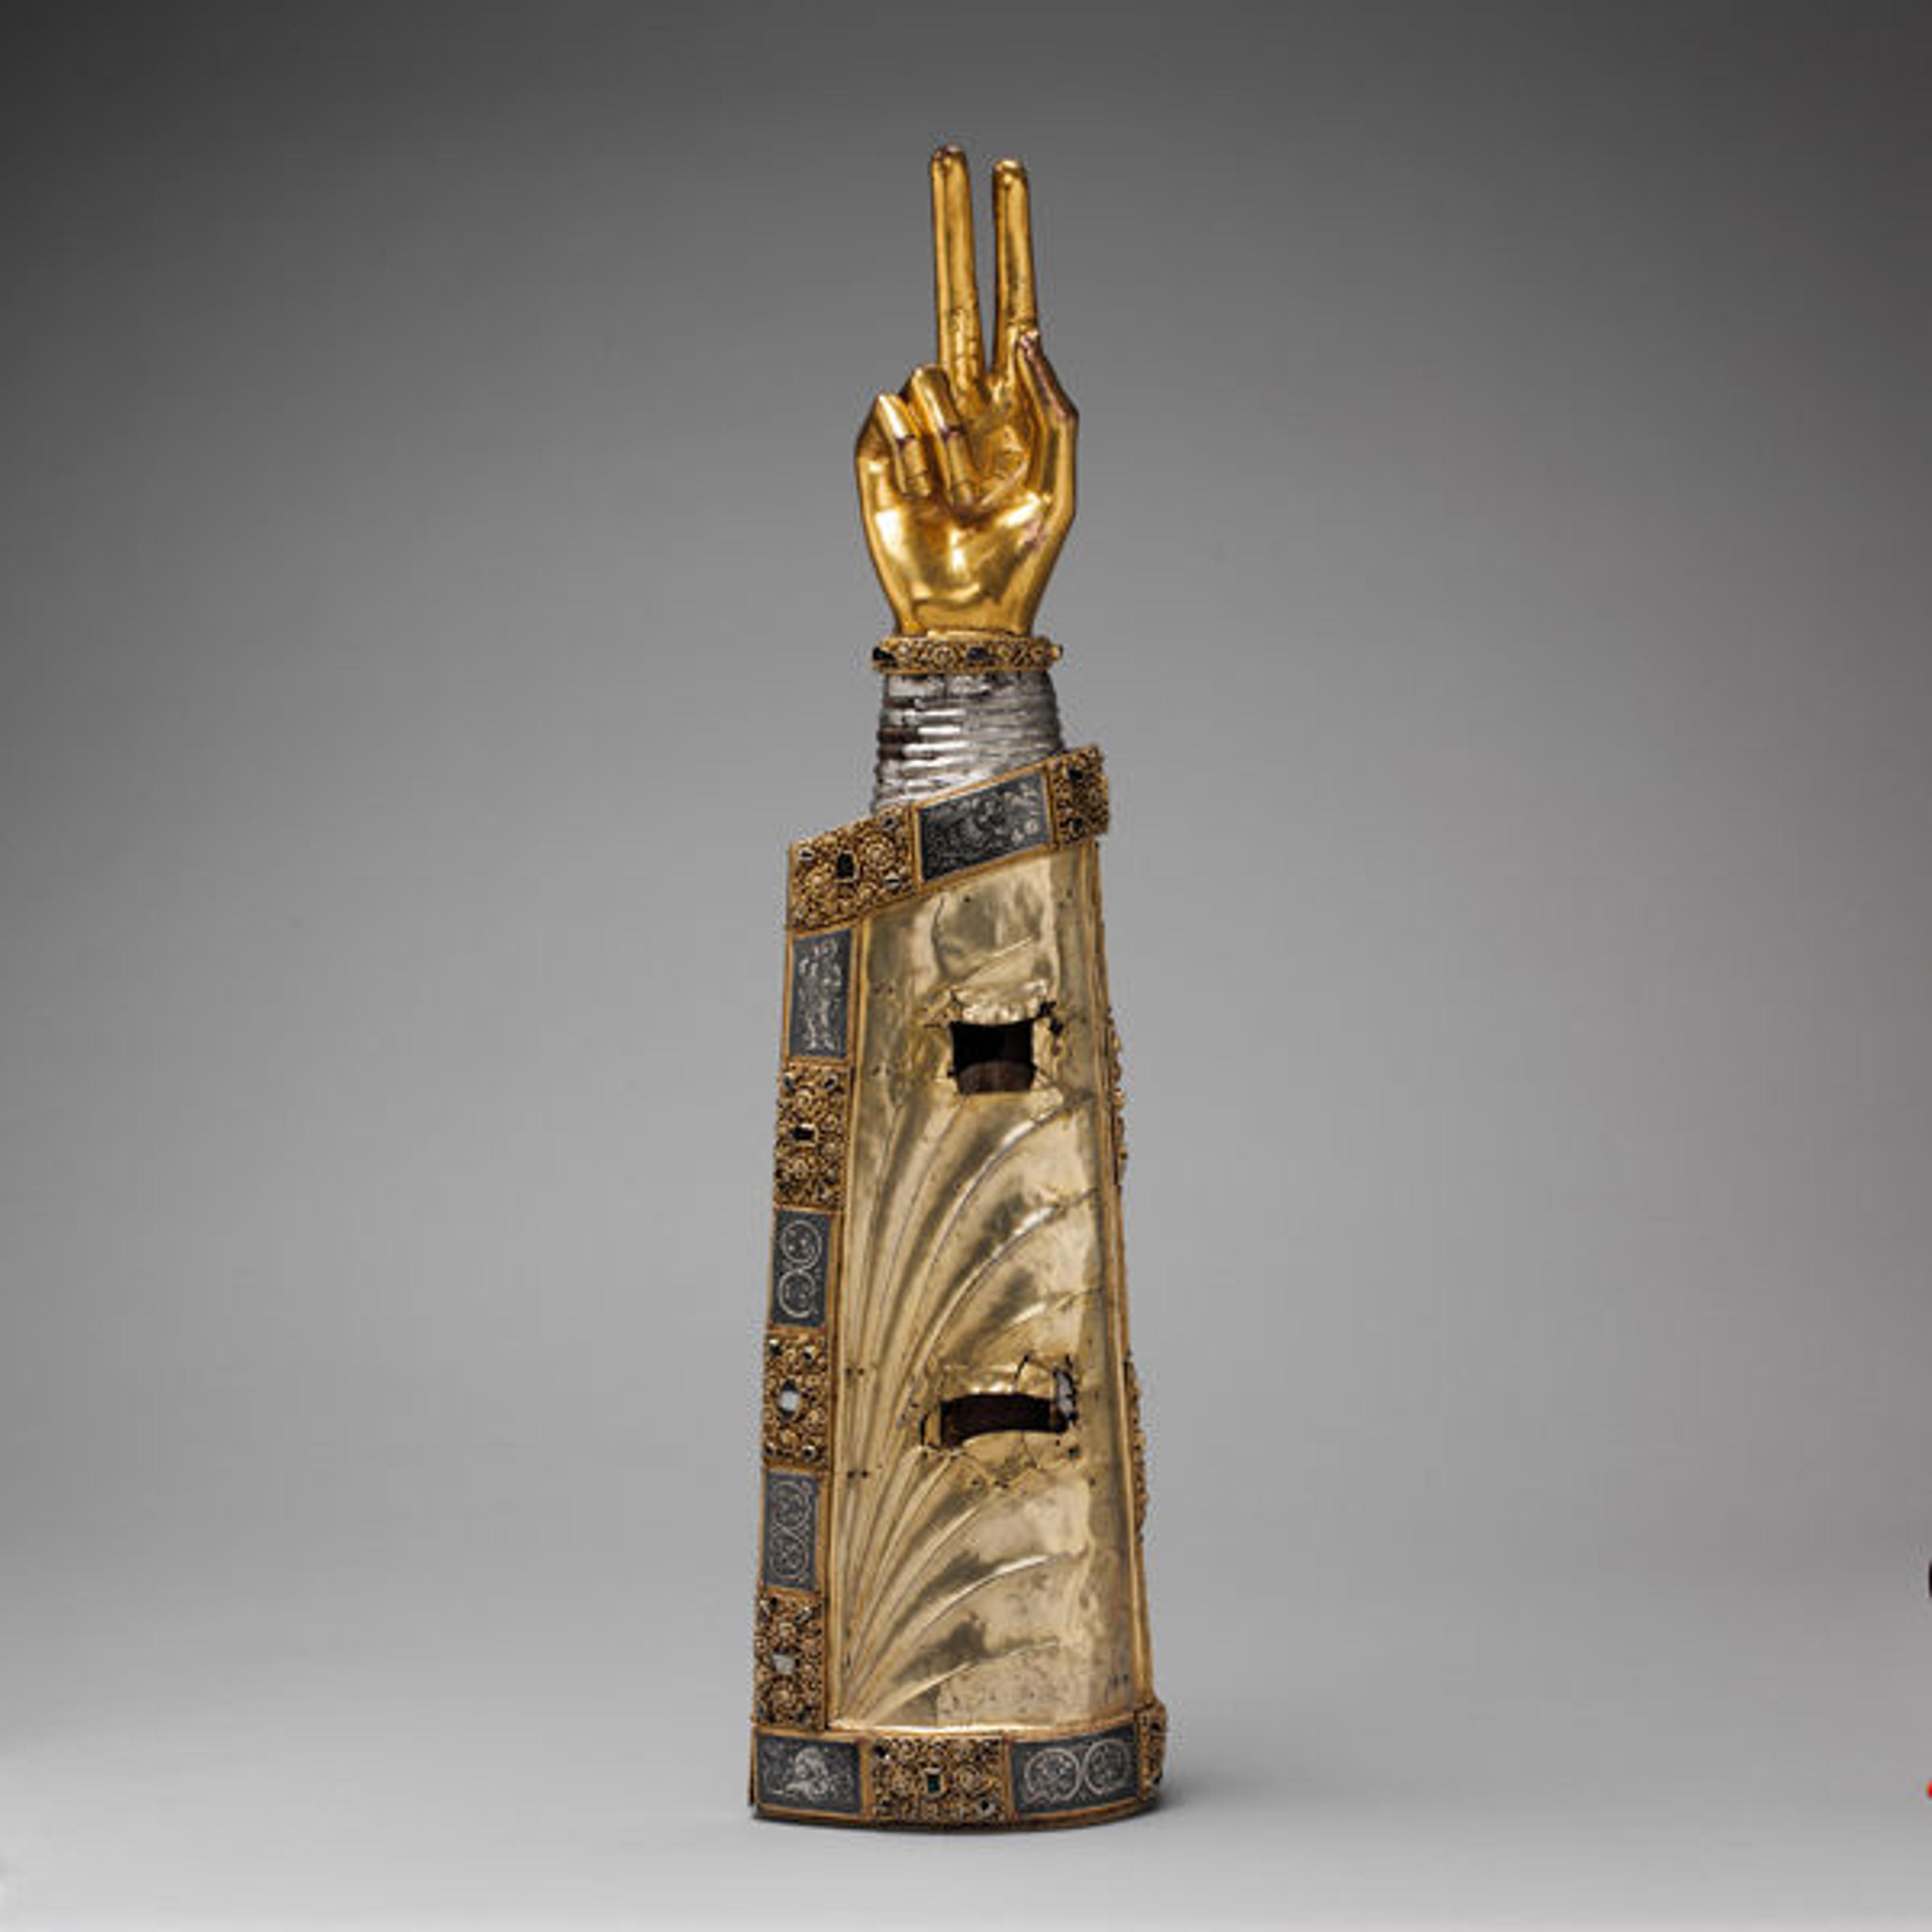 Arm Reliquary, ca.1230. Made in Meuse Valley, South Netherlands. Silver and gilded silver over wood core, niello, and gems; 25 1/2 x 6 1/2 x 4 in. (64.8 x 16.5 x 10.2 cm). The Metropolitain Museum of Art, New York, The Cloisters Collection, 1947 (47.101.33)